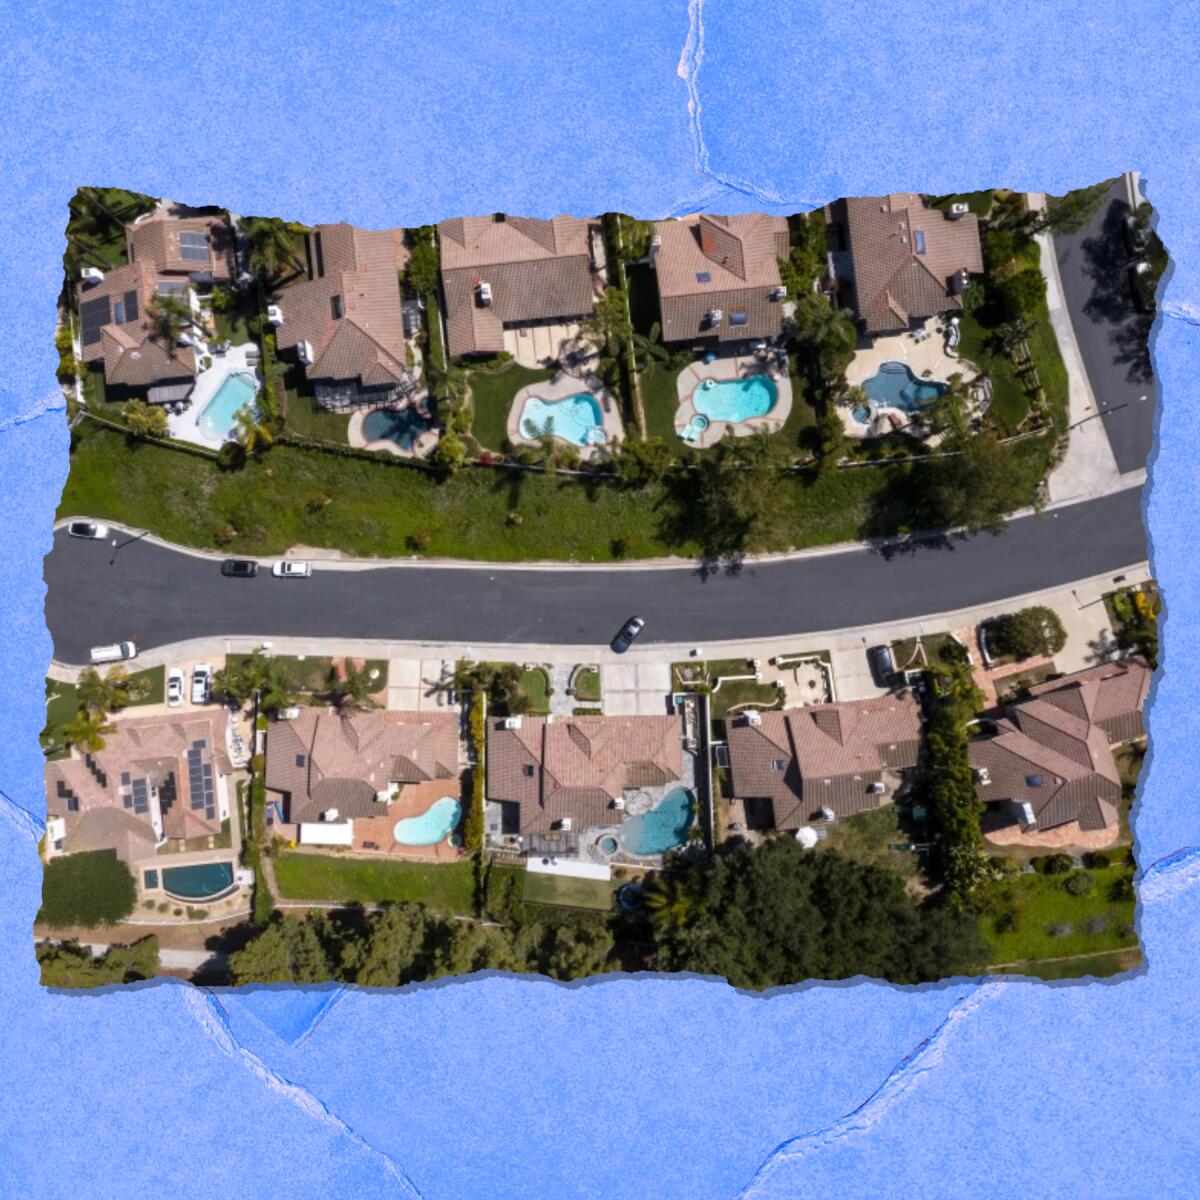 An aerial view of houses — many with swimming pools.